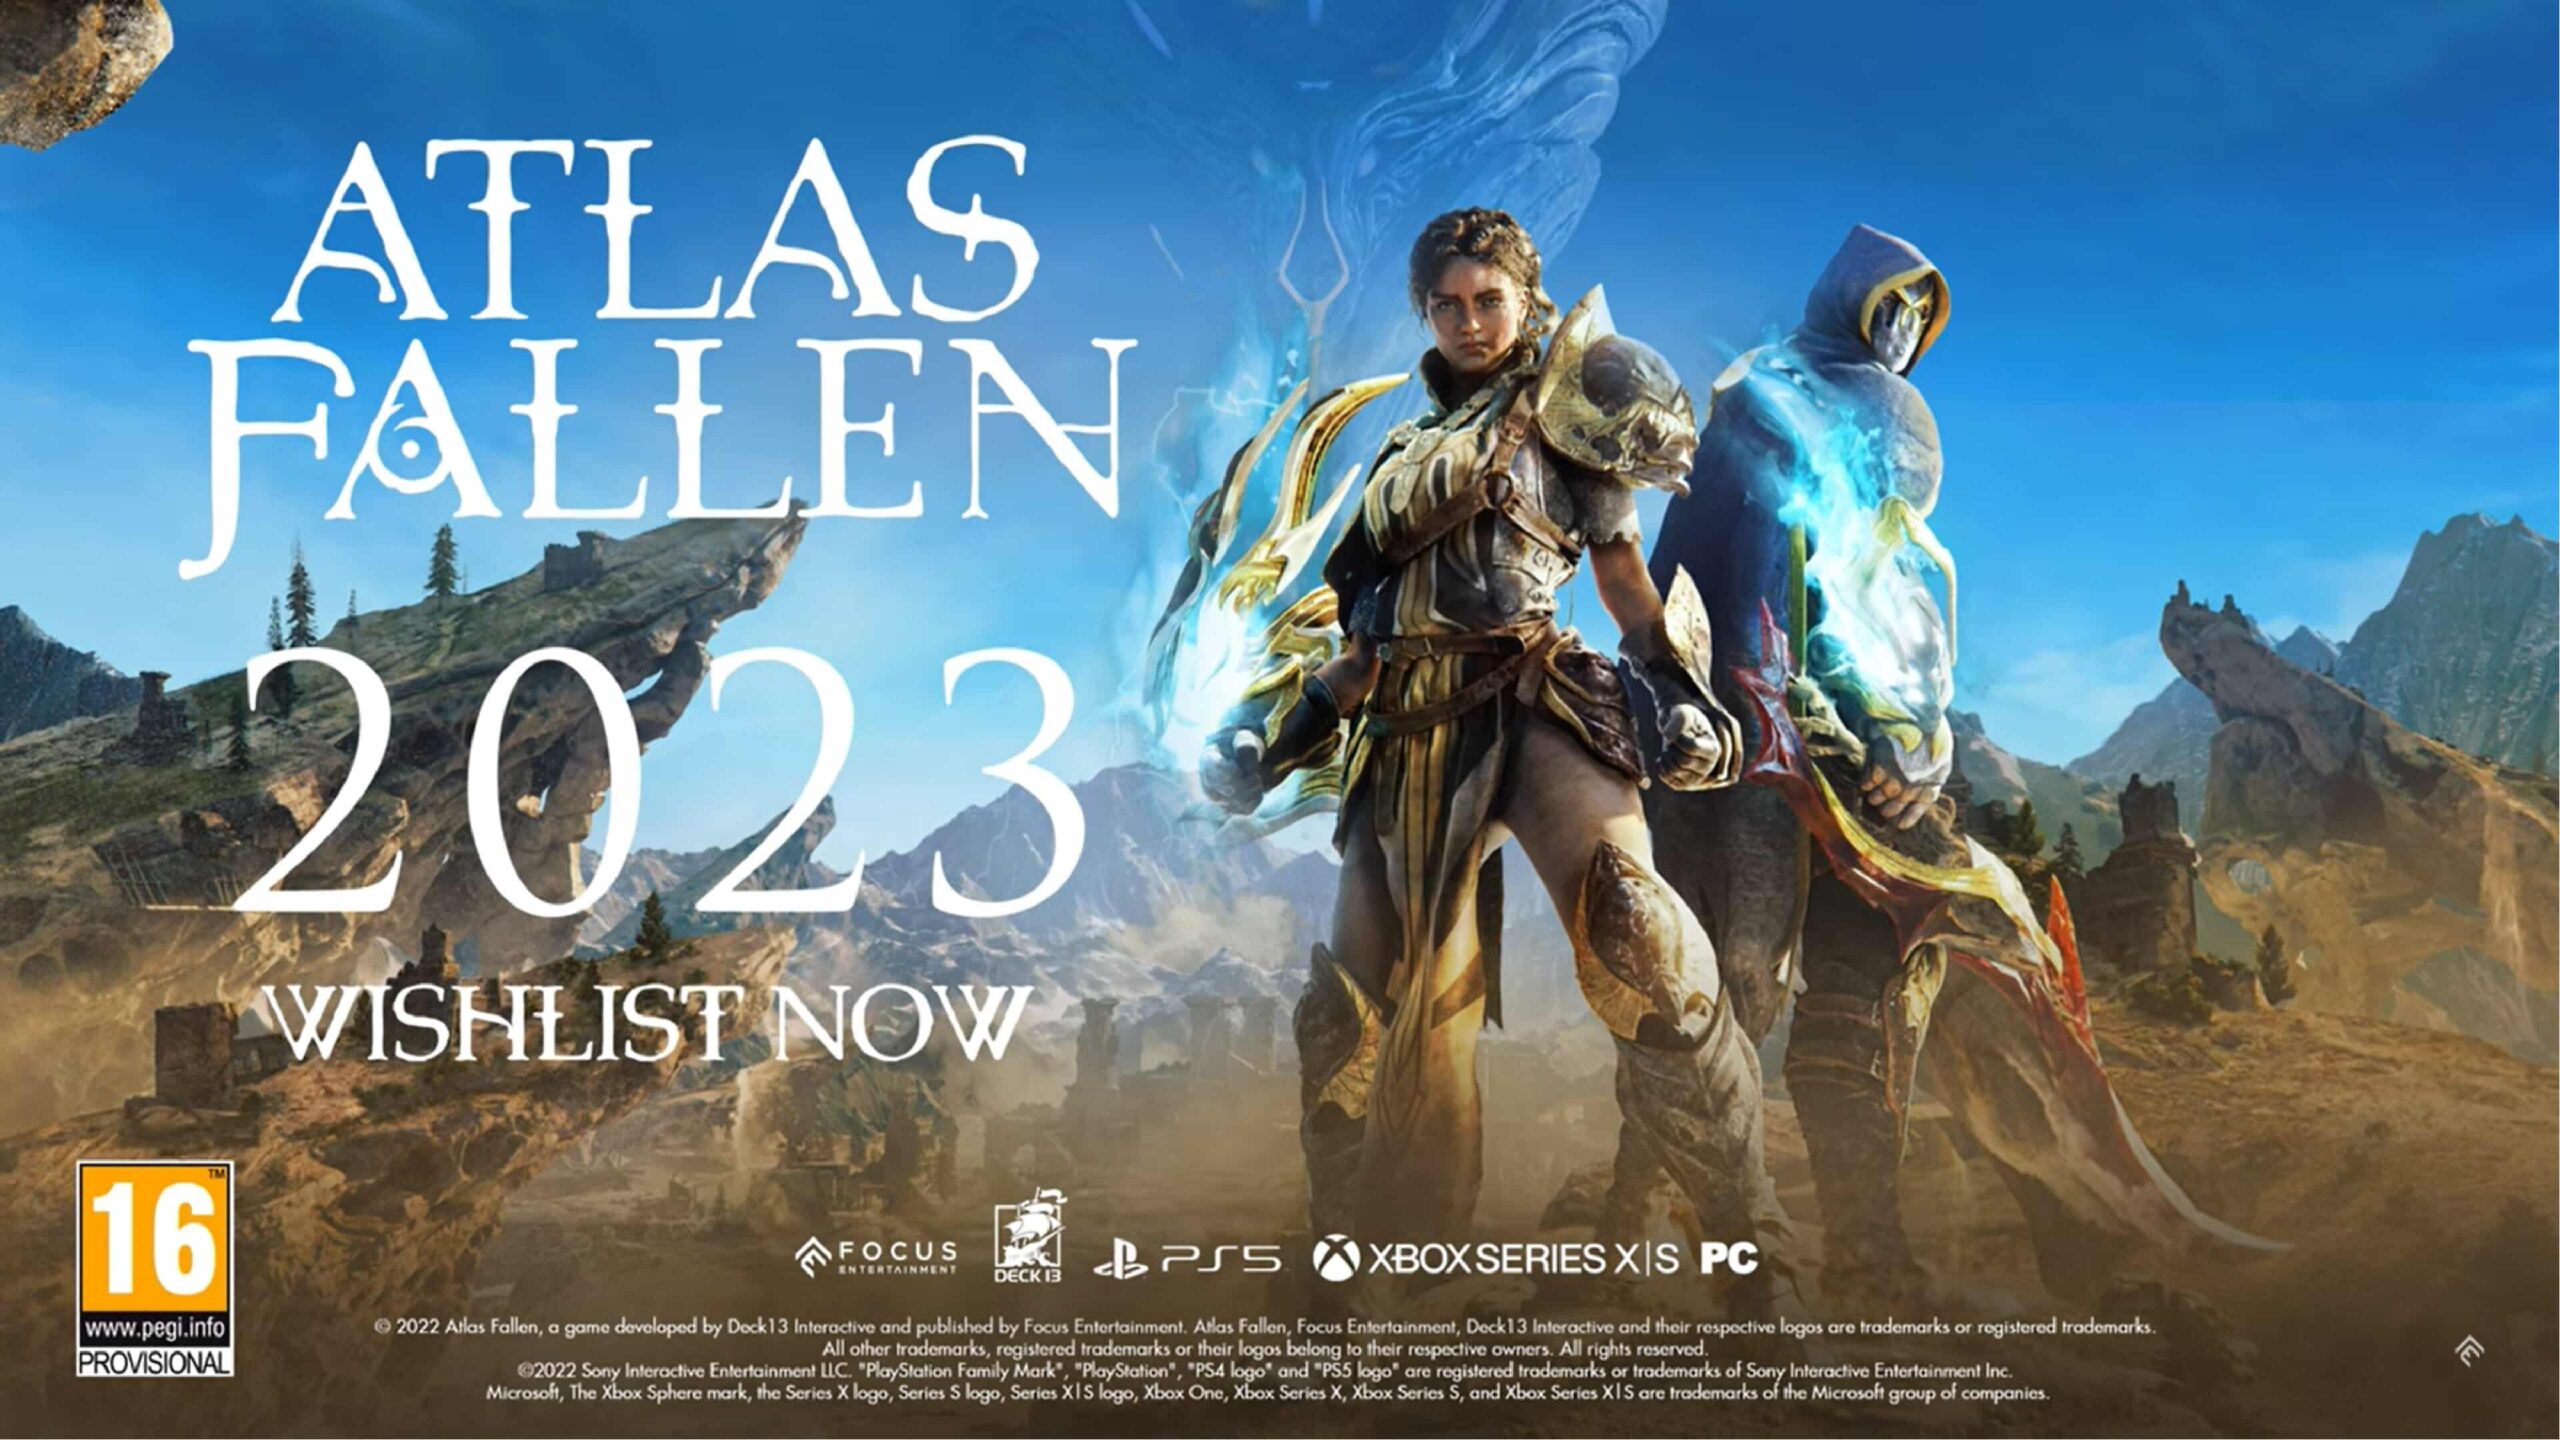 Atlas Fallen is the new Deck13 game to be released in 2023 for Xbox Series X/S, PS5, and PC